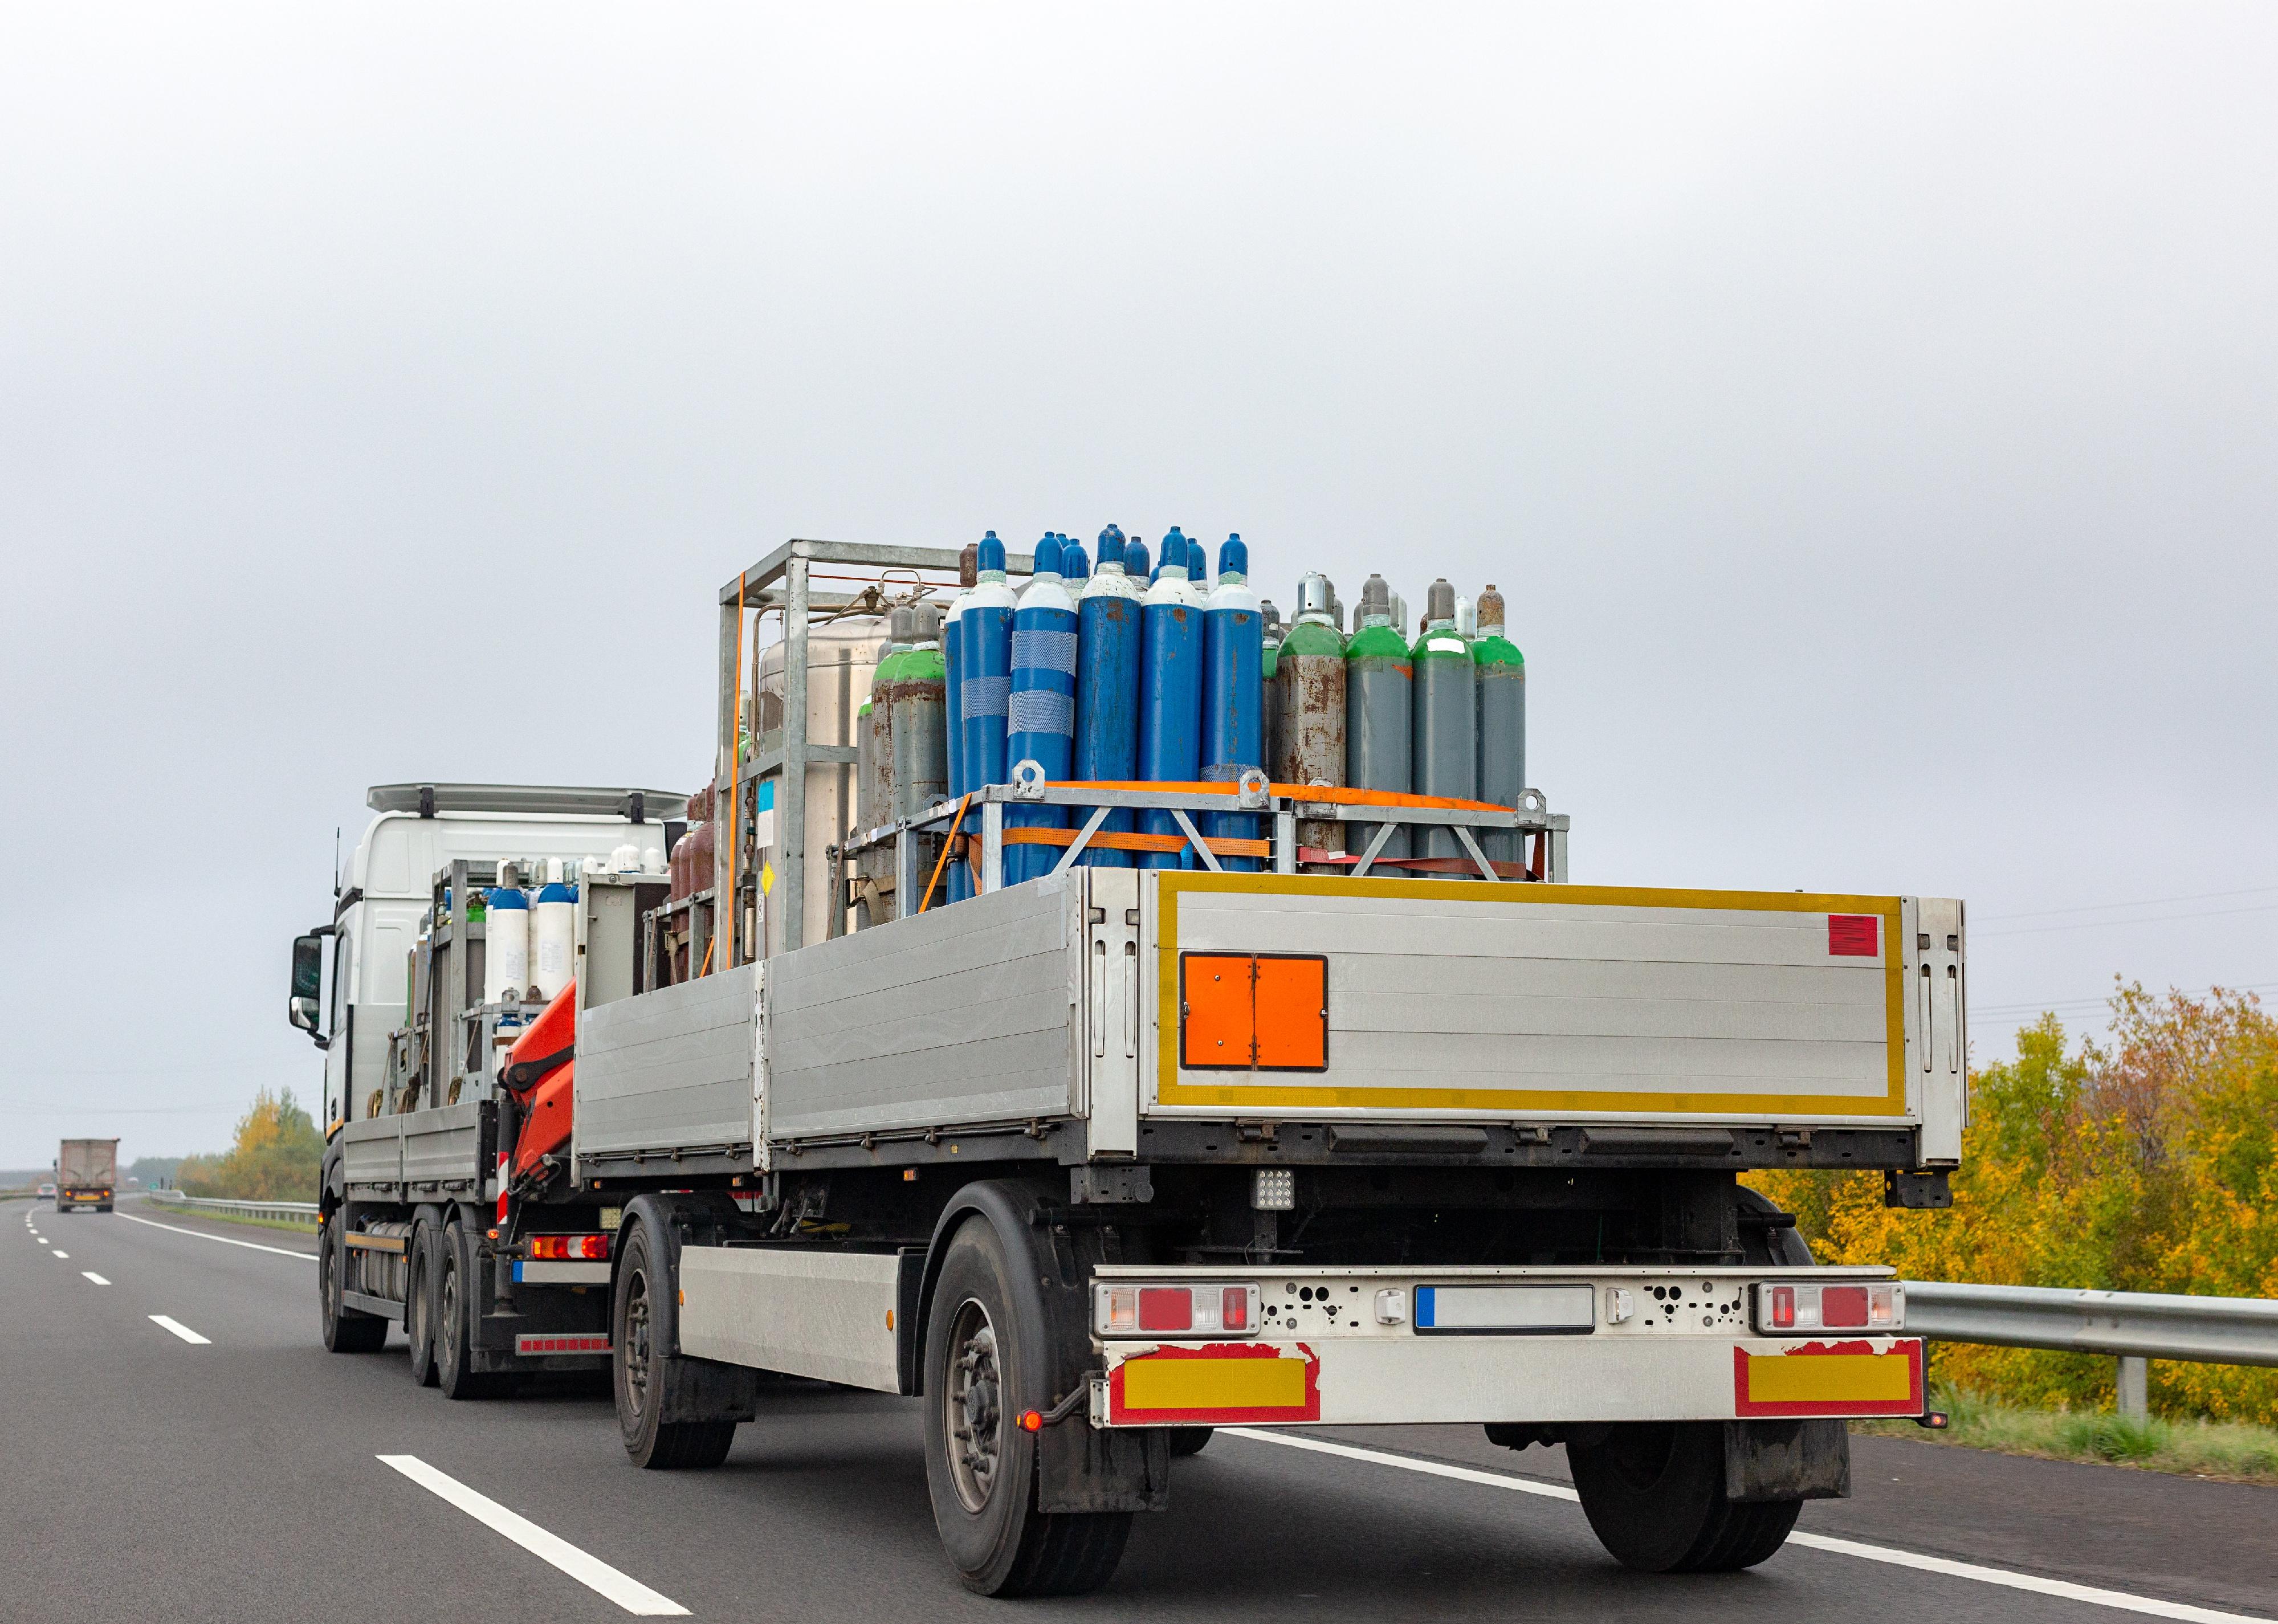 Truck delivering gas cylinders for medical purposes.